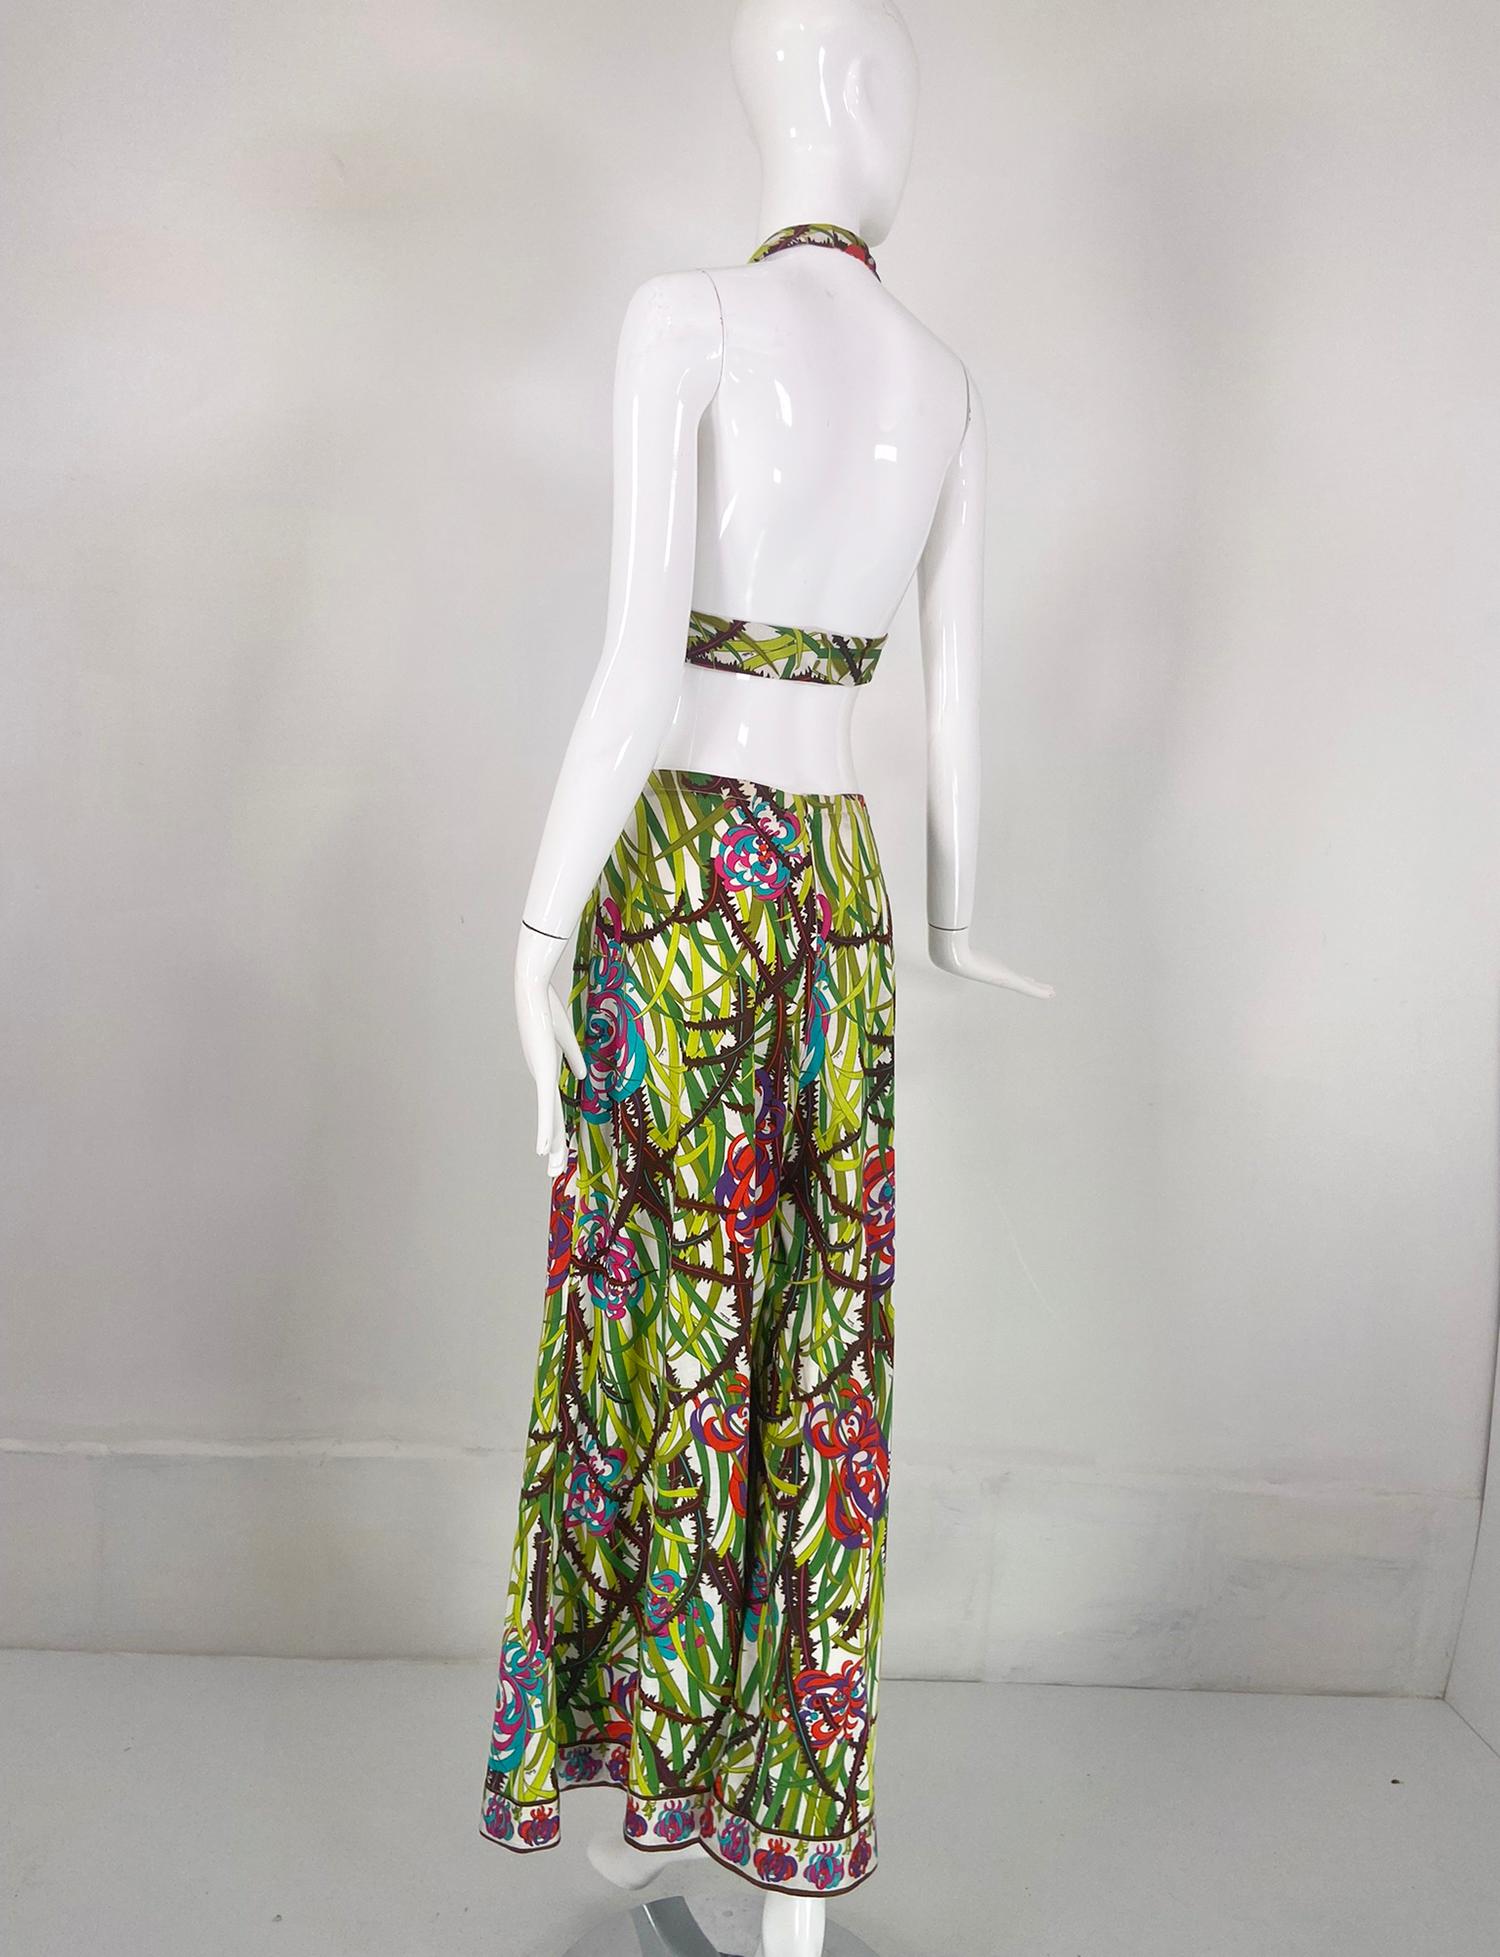 Emilio Pucci Printed Cotton Jersey Palazzo Pant & Bra Beach Pajamas 4/15/1975 In Good Condition For Sale In West Palm Beach, FL